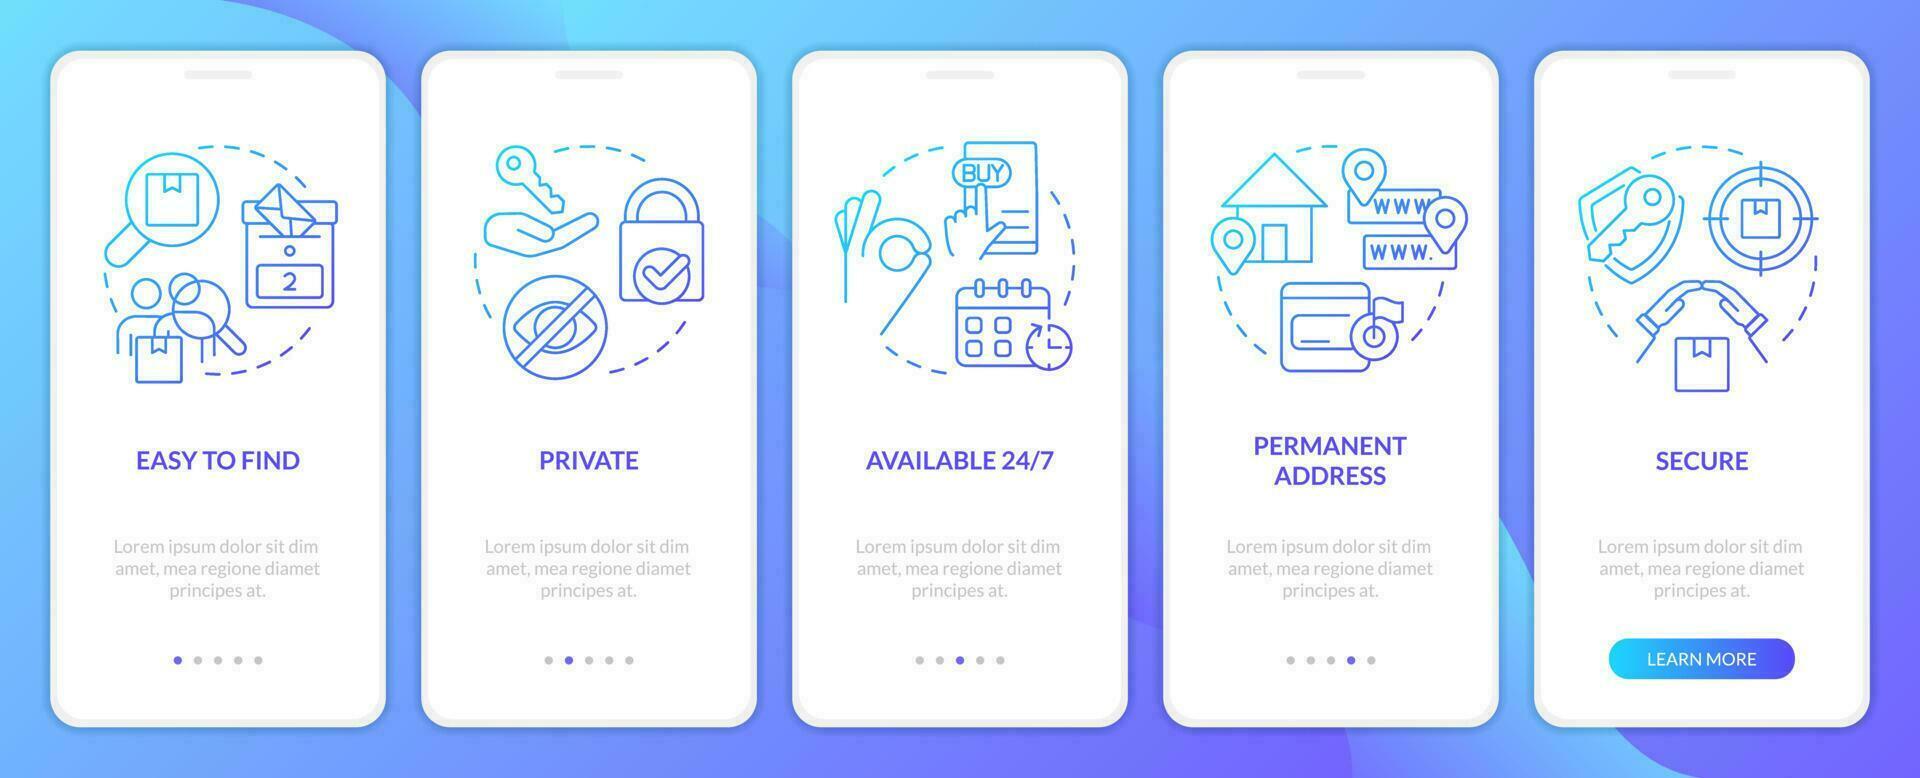 Using po boxes pros blue gradient onboarding mobile app screen. Walkthrough 5 steps graphic instructions with linear blue gradient concepts. UI, UX, GUI template vector